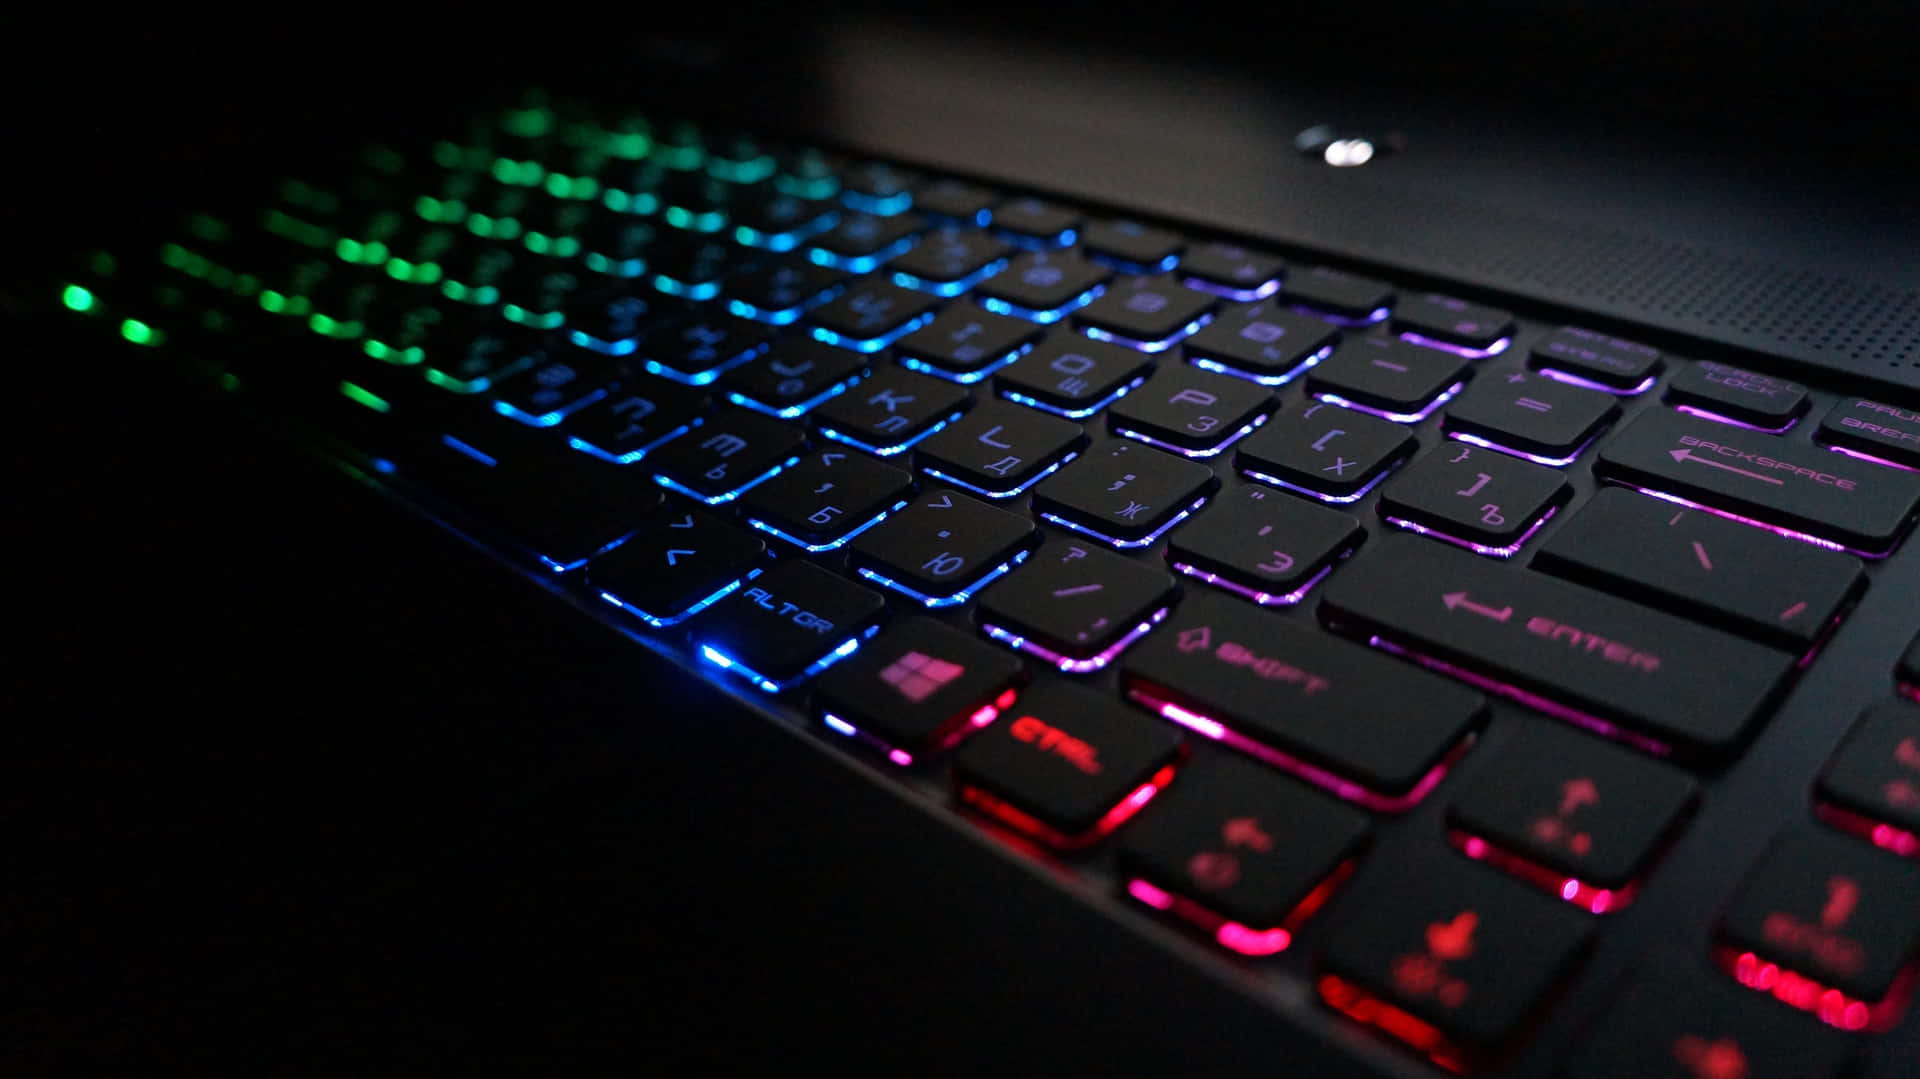 Light up your gaming setup with the perfect gaming keyboard! Wallpaper